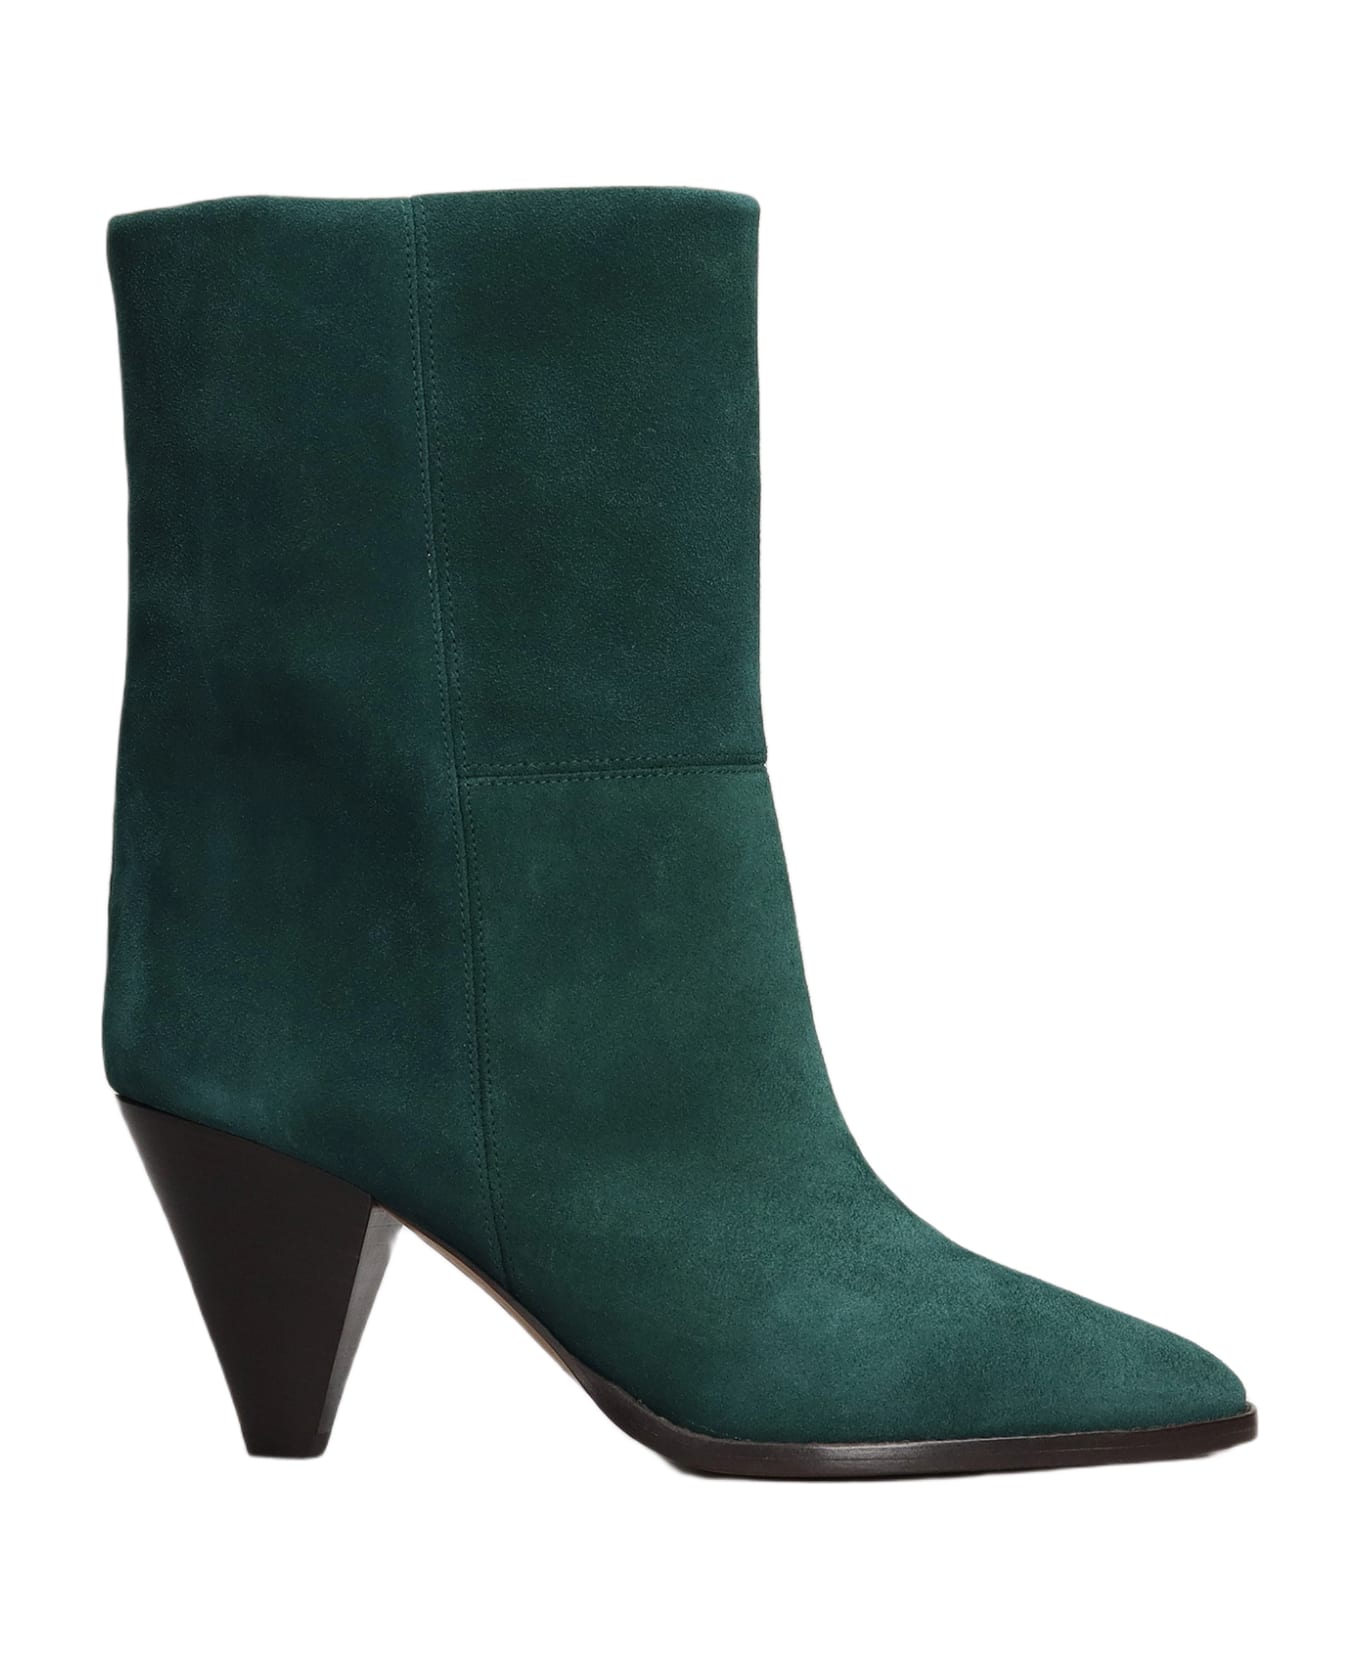 Isabel Marant Rouxa High Heels Ankle Boots - green ブーツ